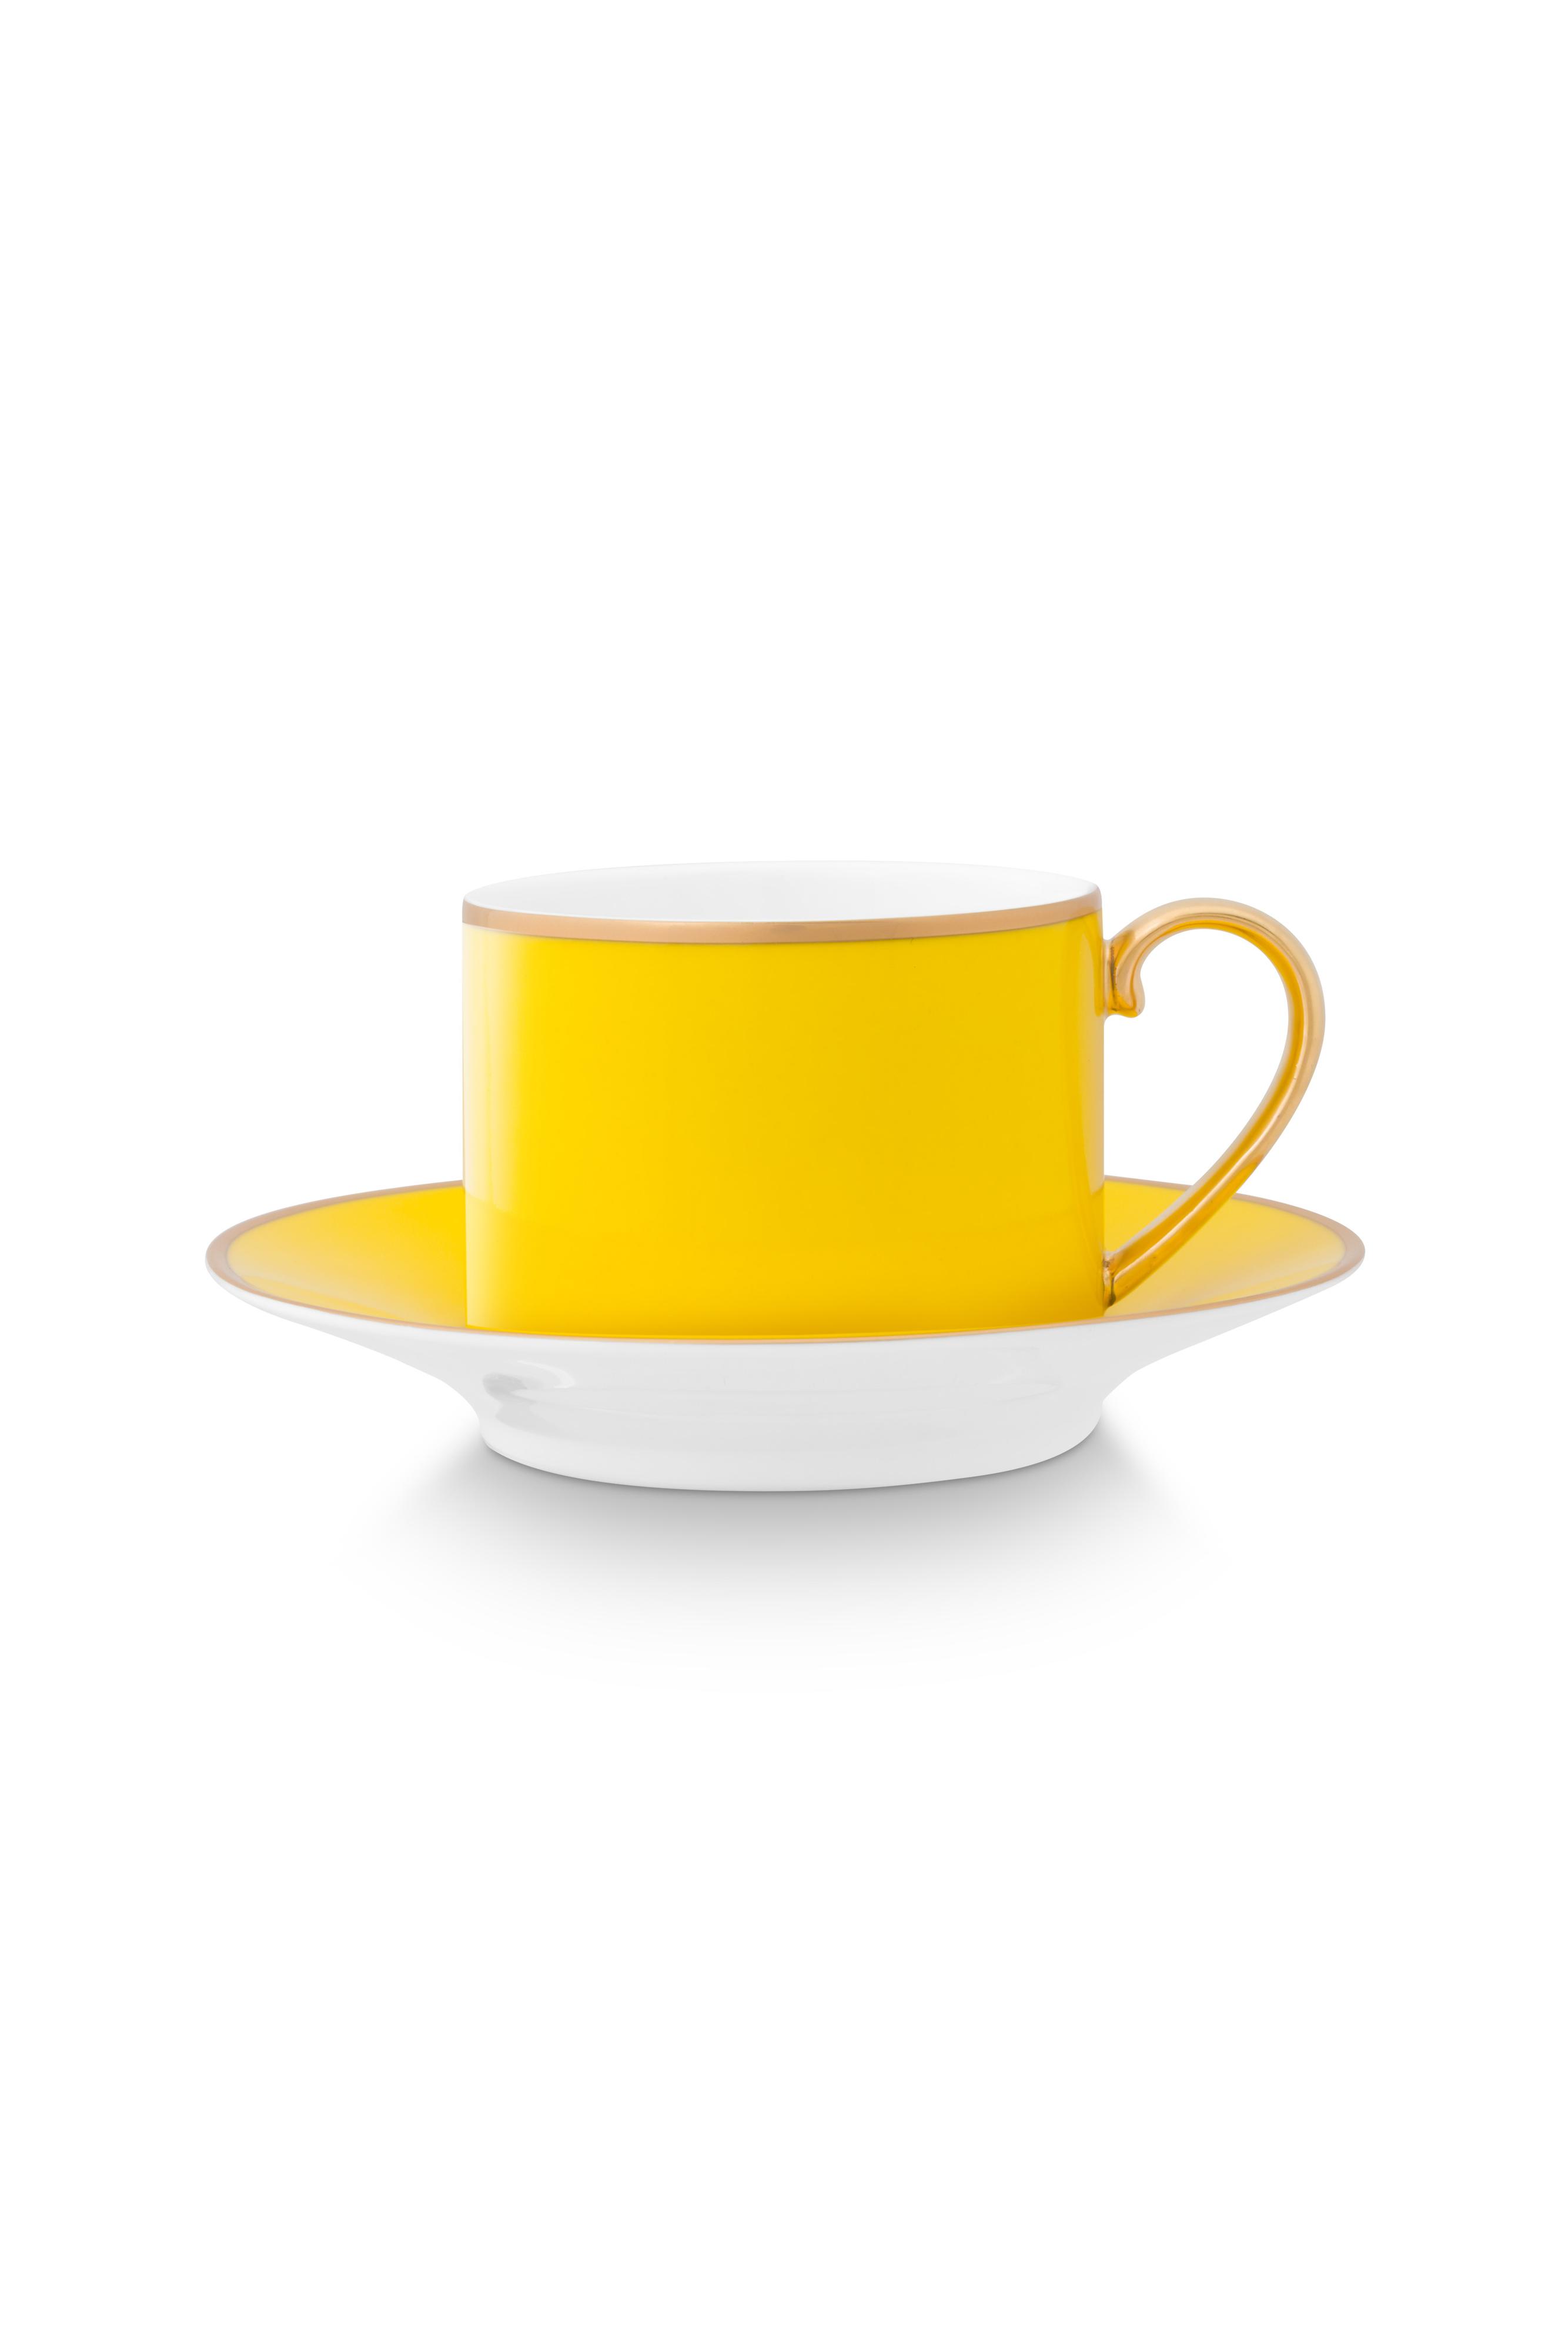 Cup & Saucer Pip Chique Gold-yellow 220ml Gift